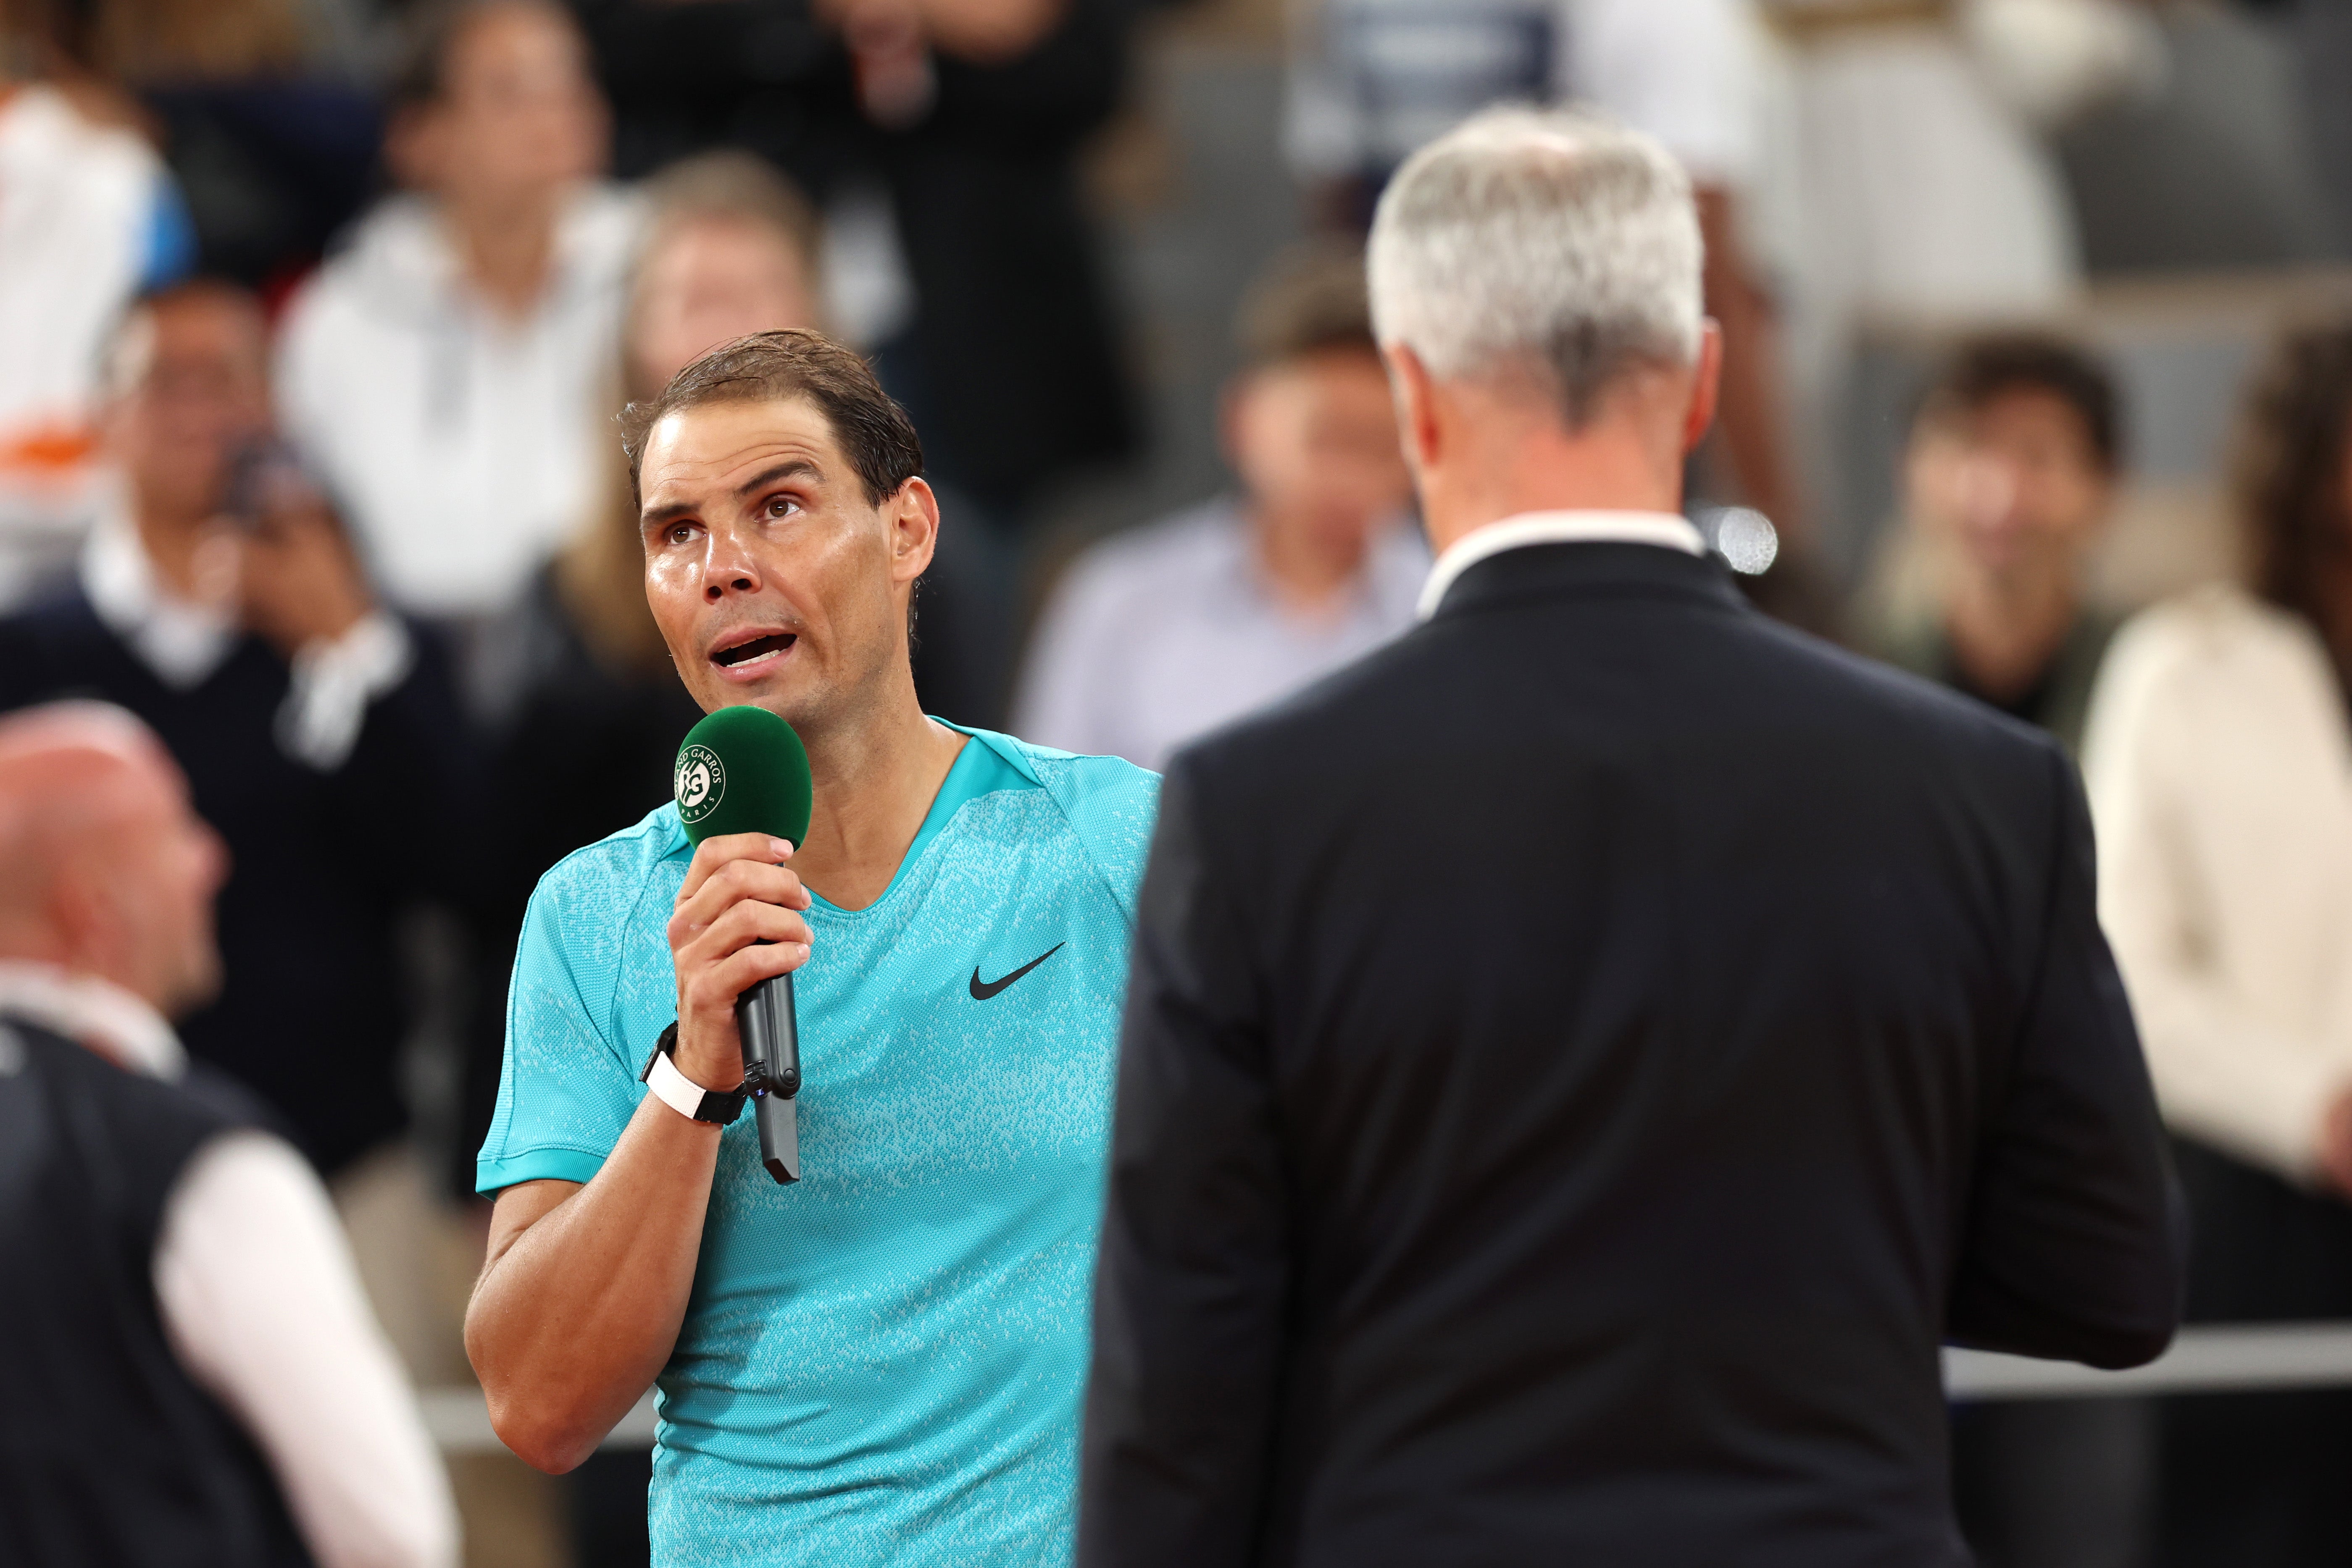 Nadal speaks to the crowd after his straight-sets defeat